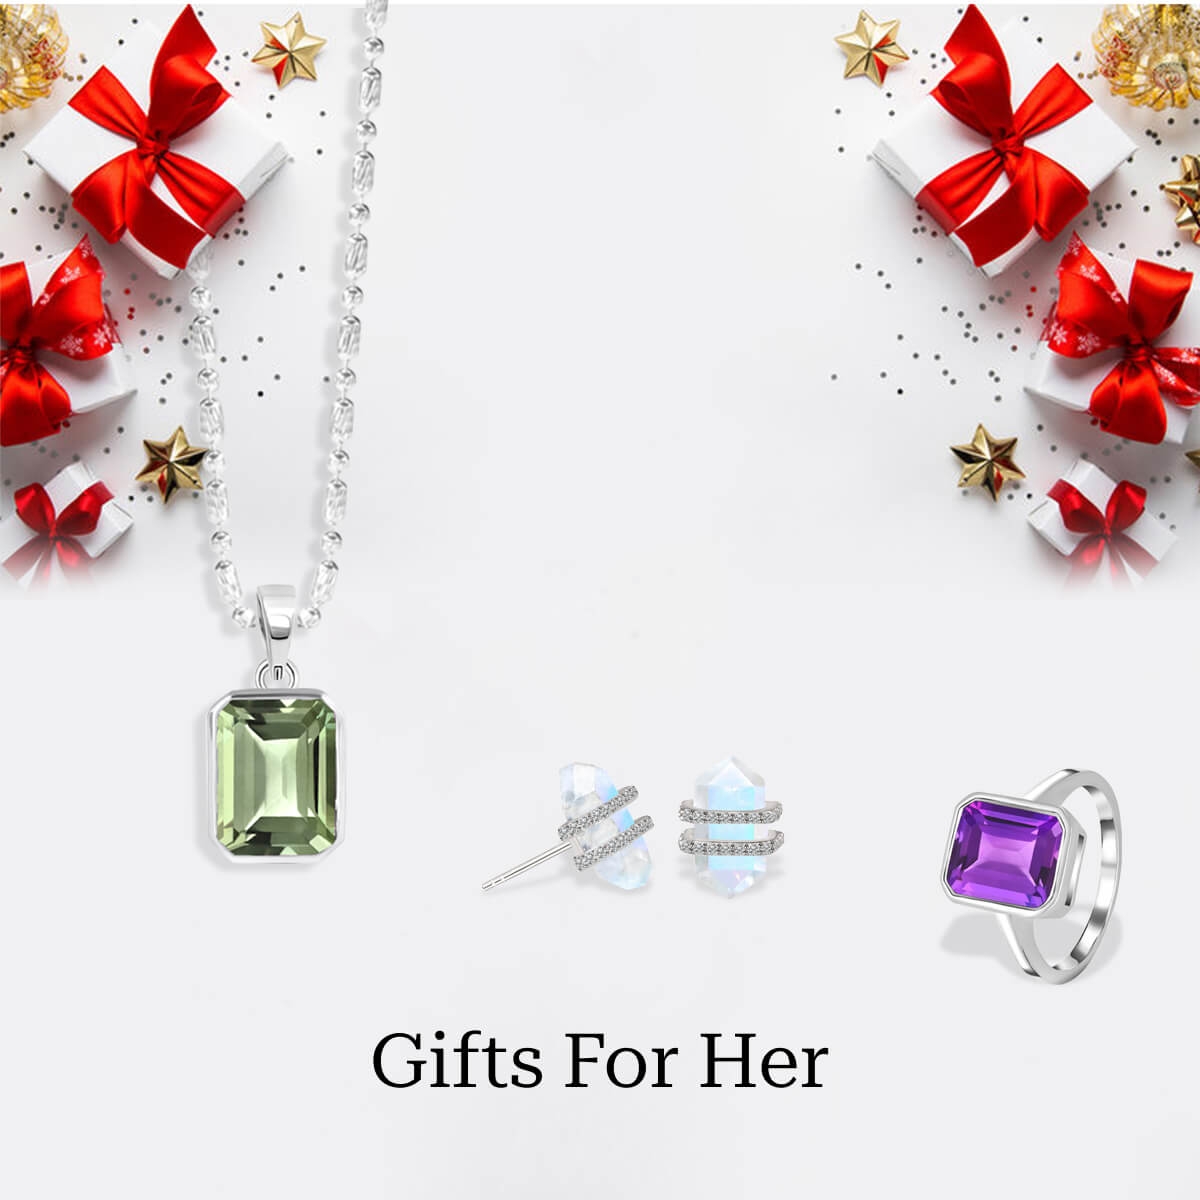 Christmas Gifts For Your Lady Love